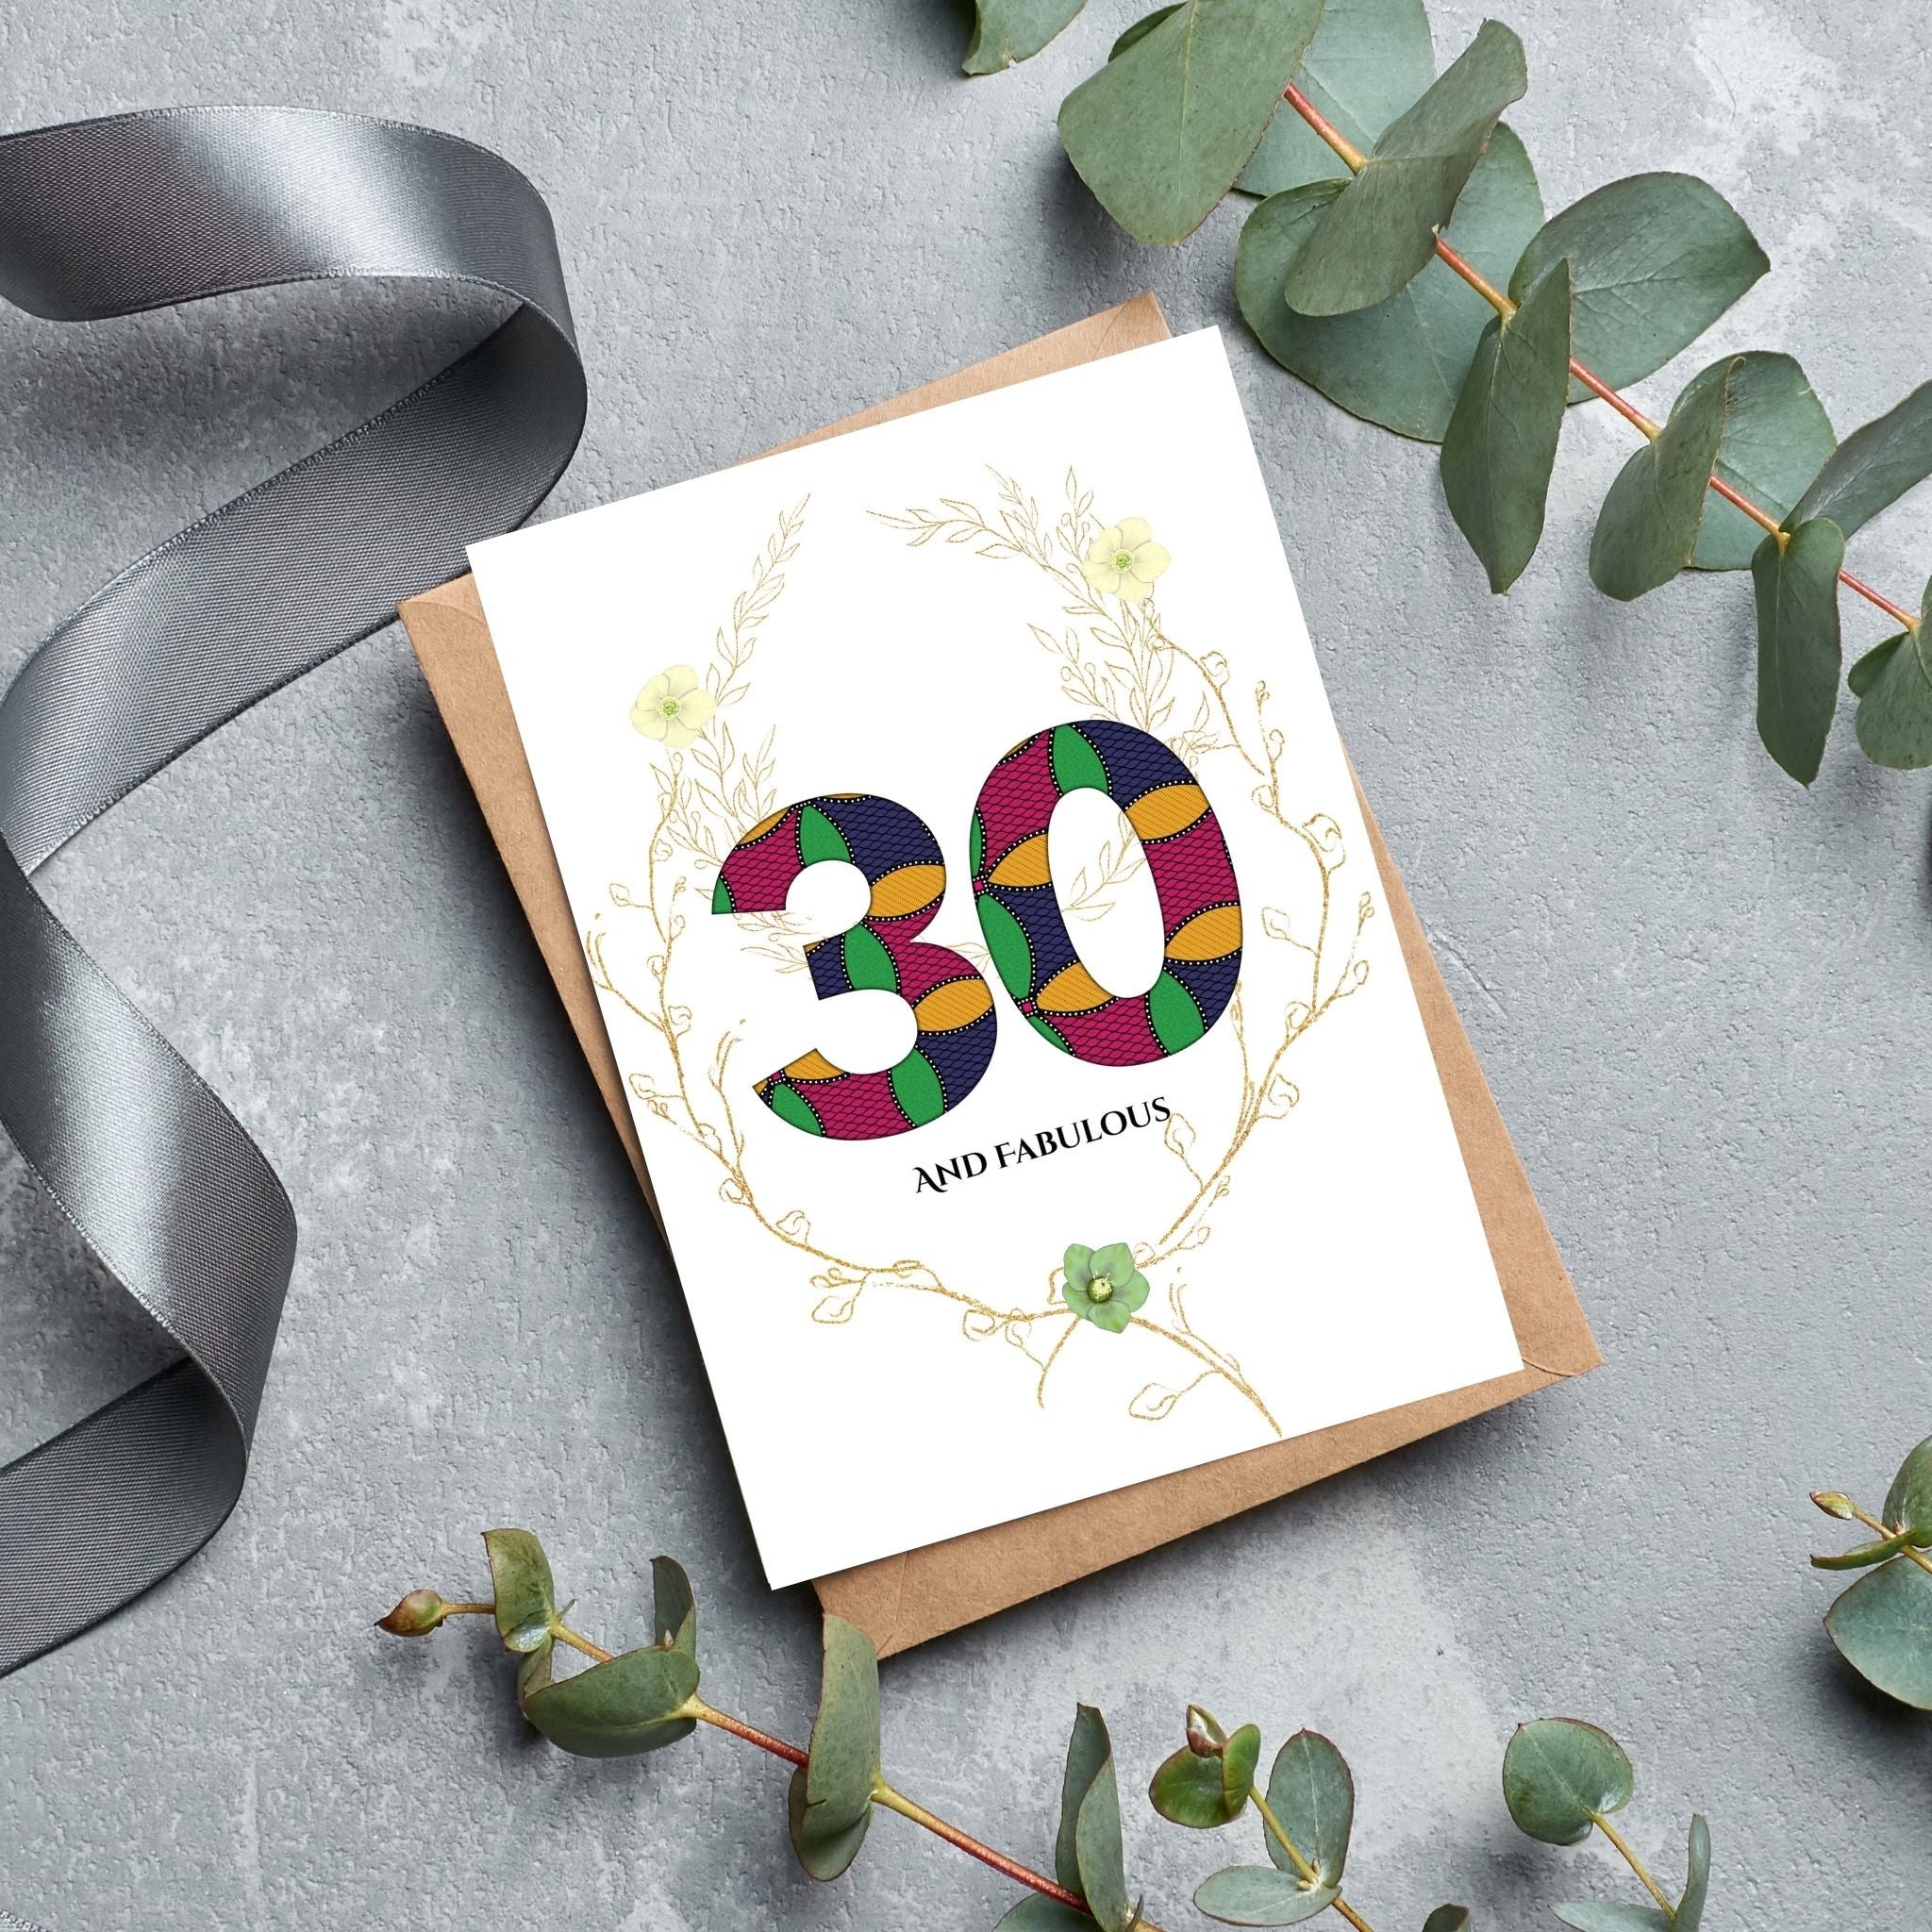 Milestones Birthday Cards in African Print for Age 30, 40, 50, 70, 80